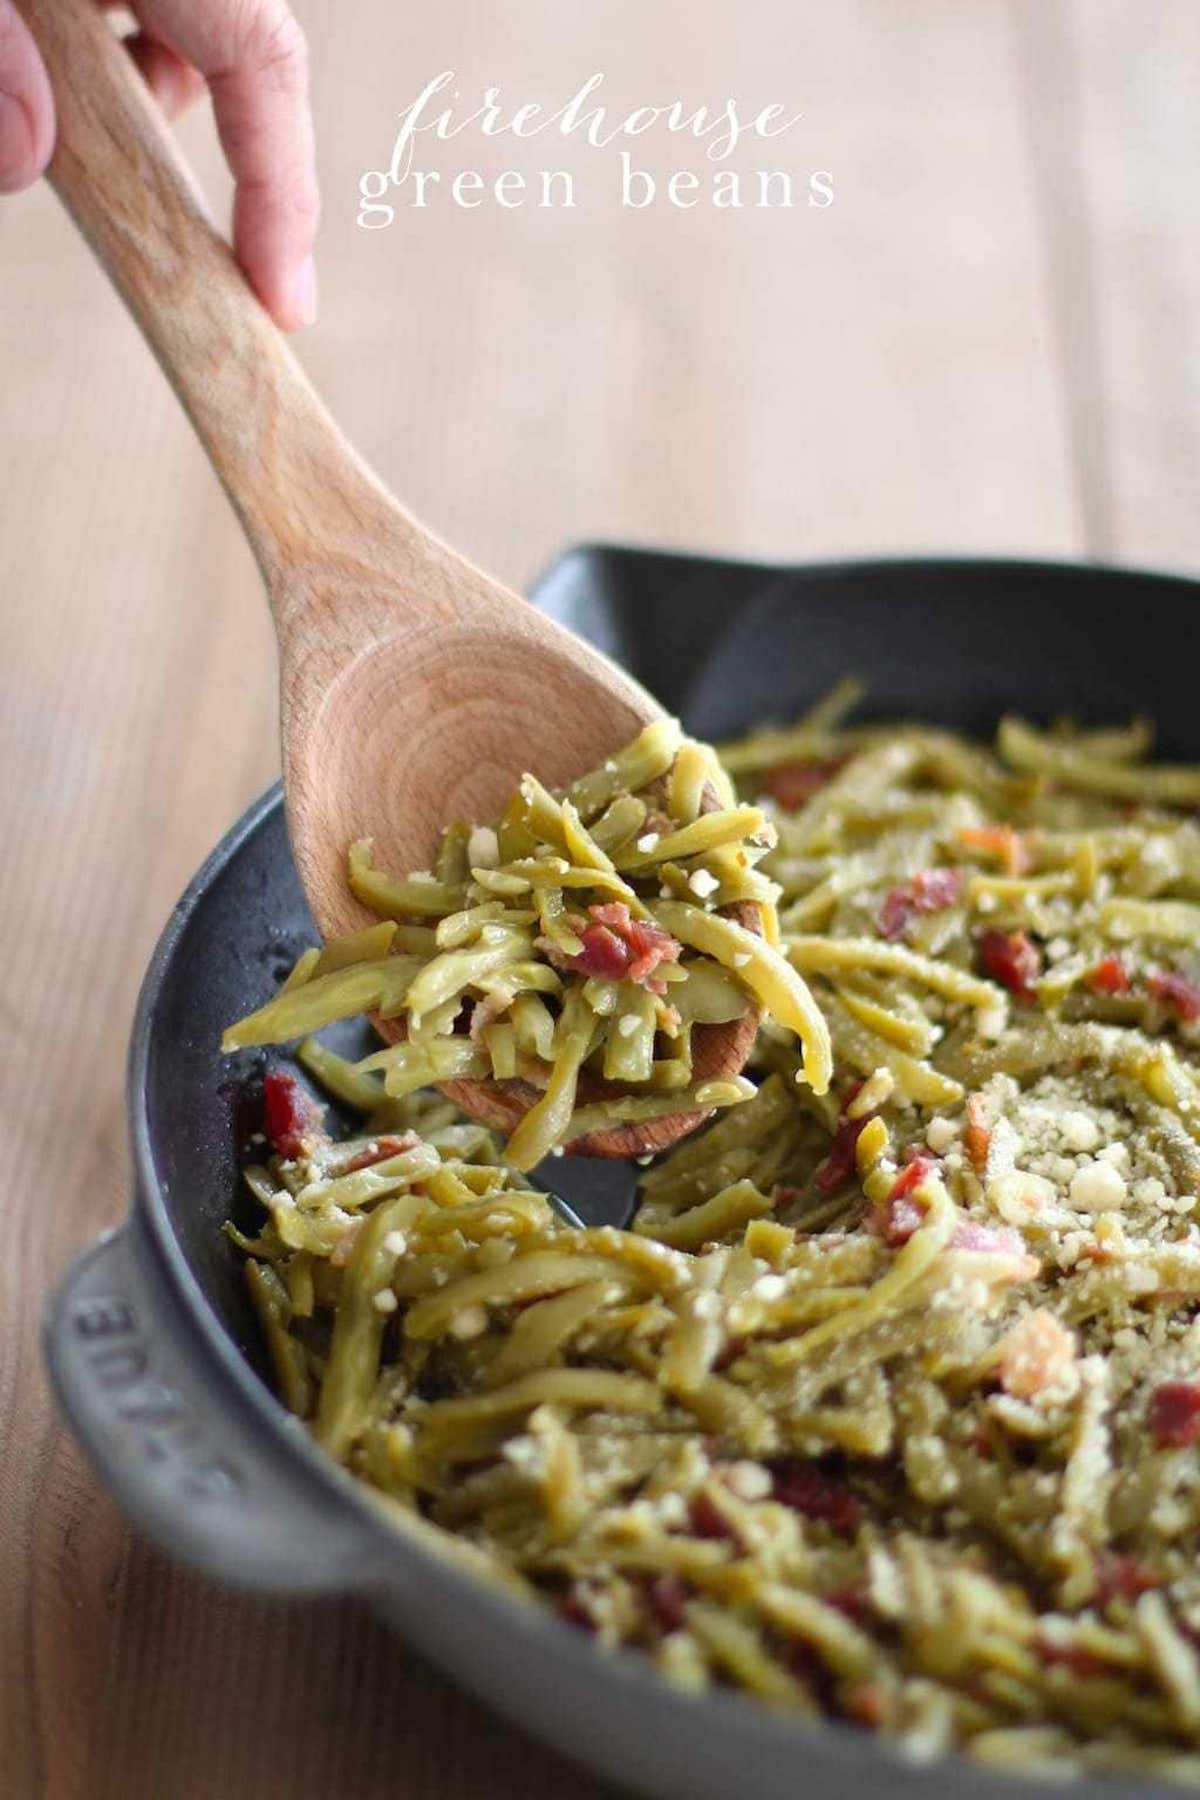 firehouse green beans with bacon in a black skillet